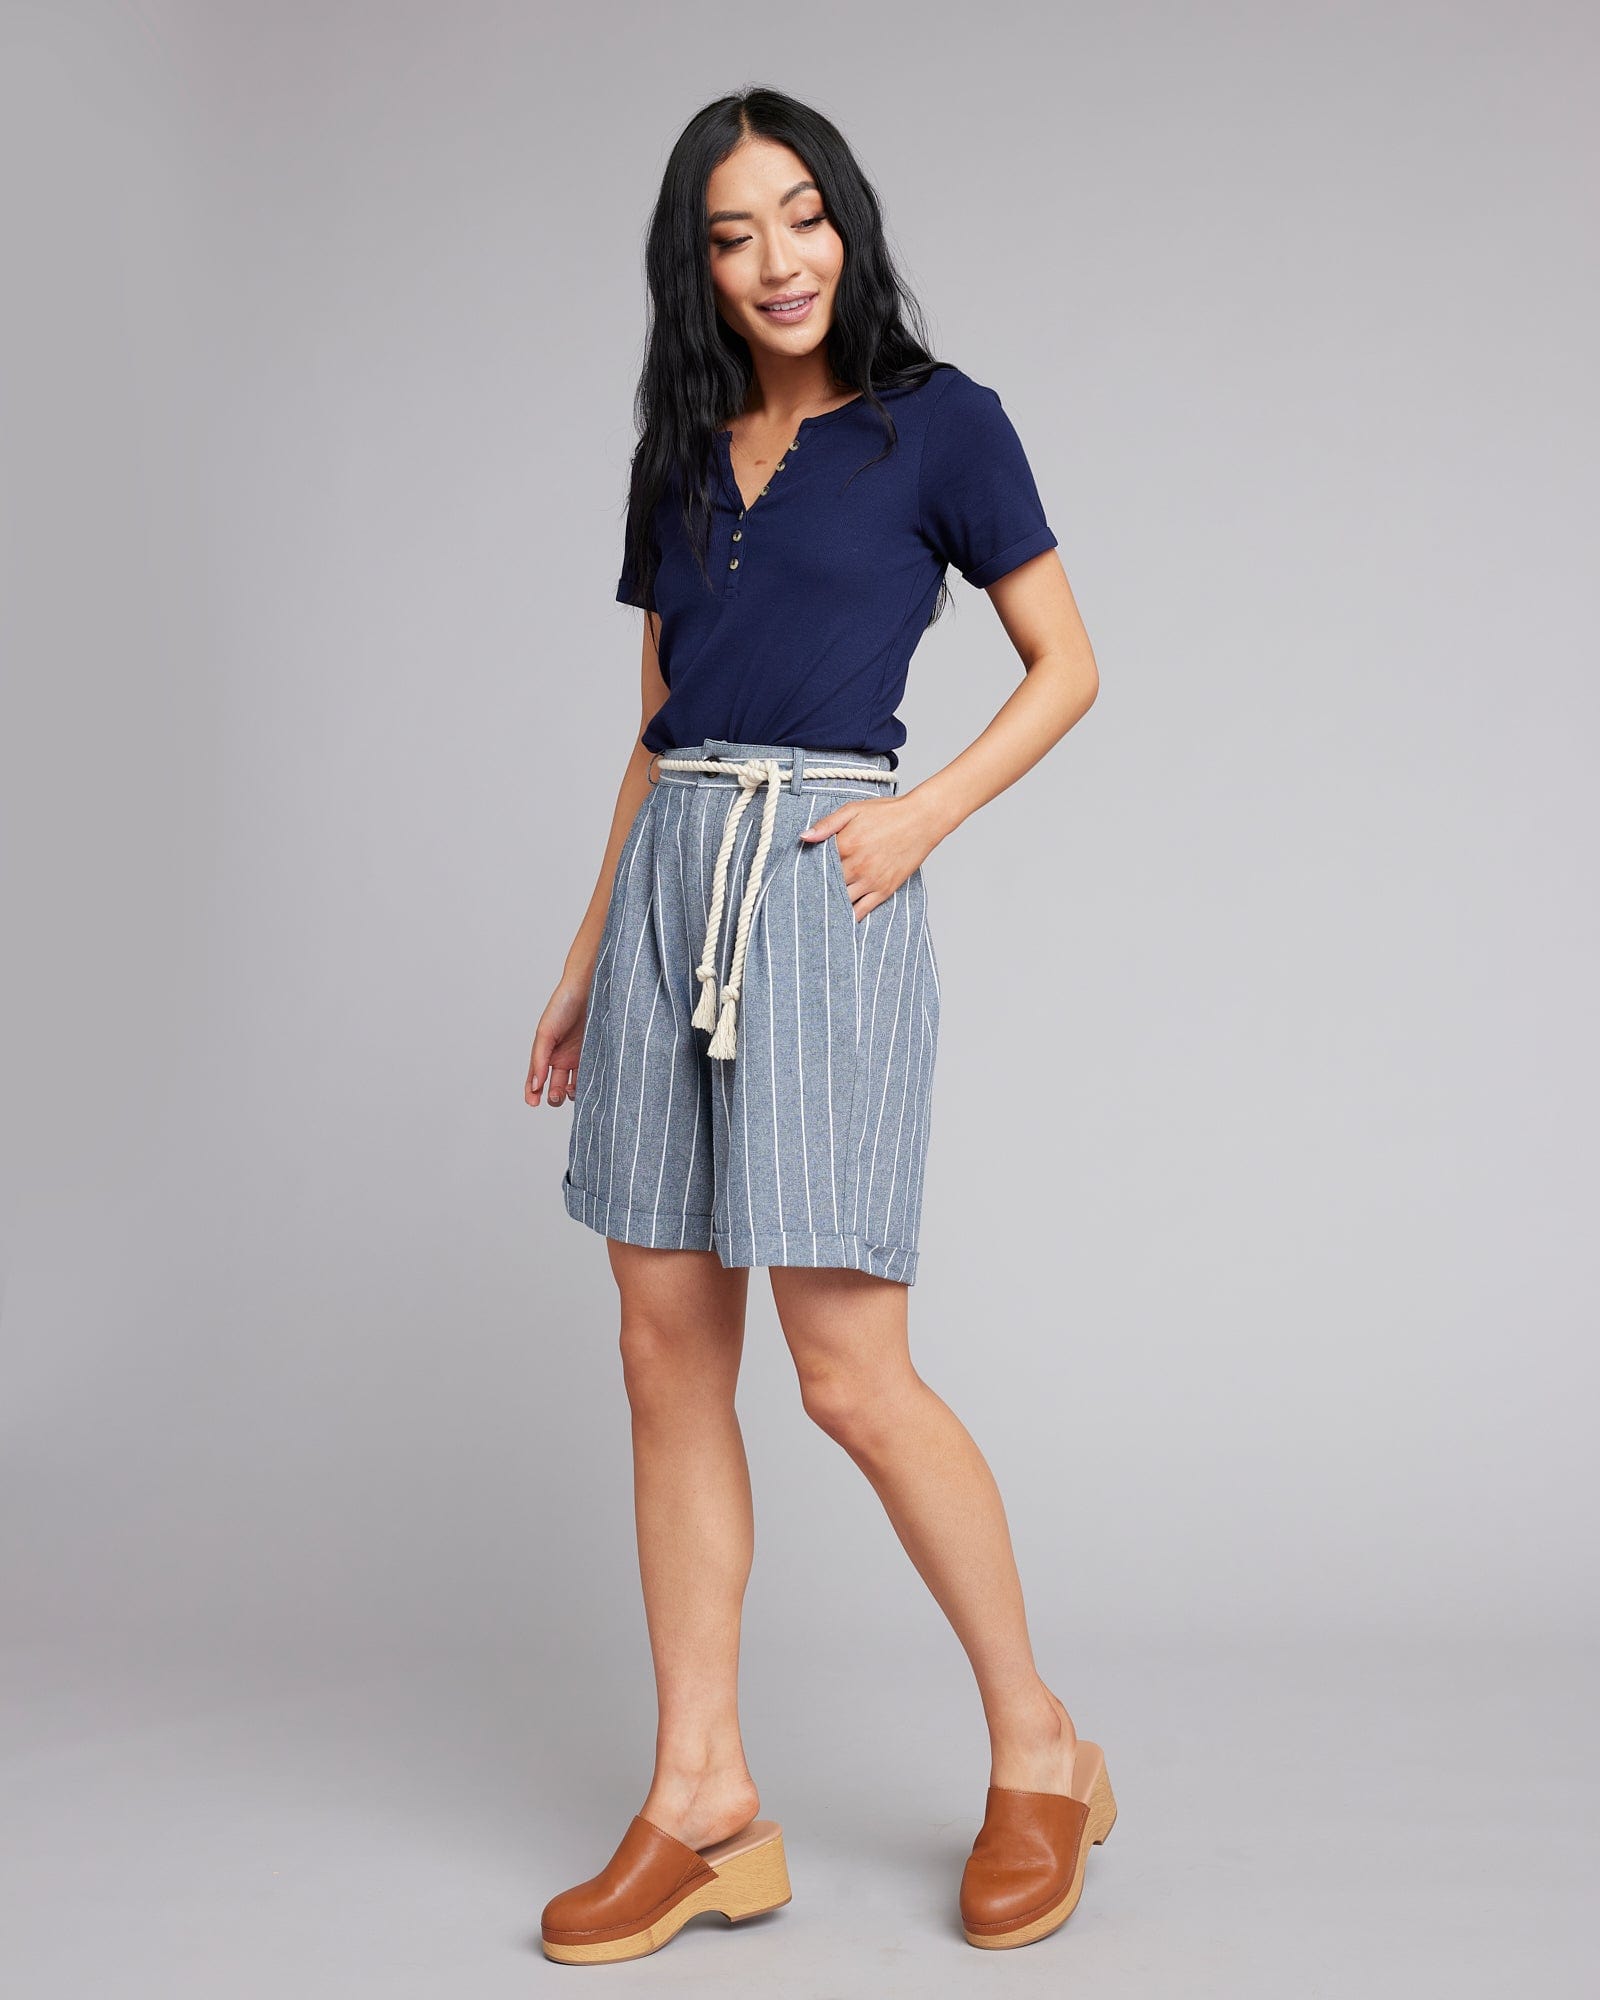 Woman in blue and white vertical striped shorts